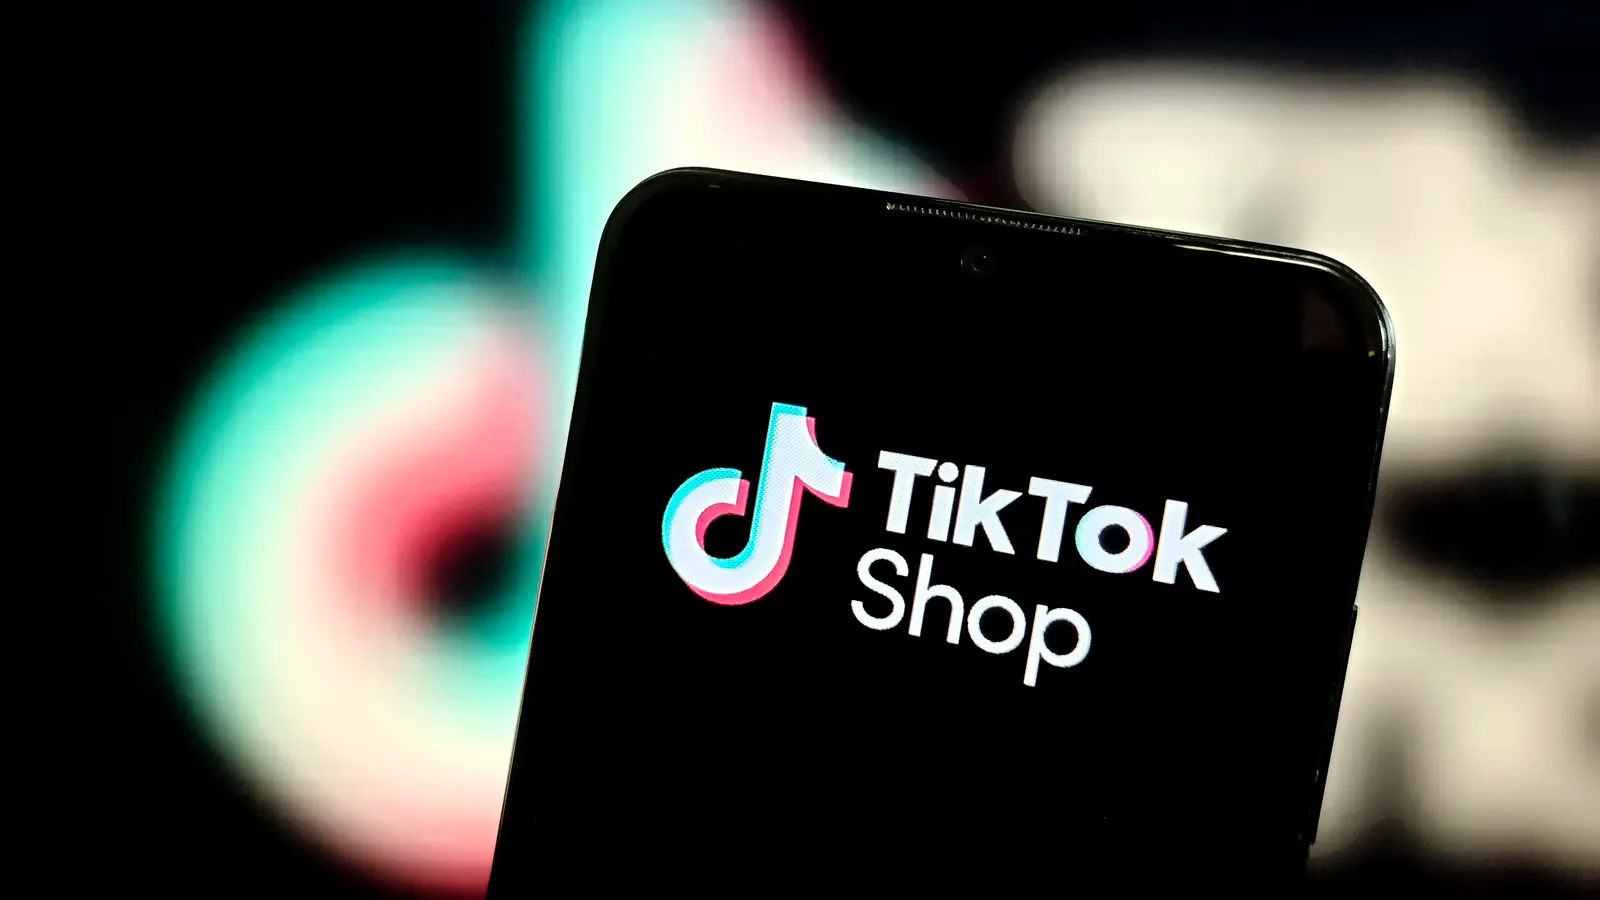 Image of TikTok Shop on a cellphone, suggesting it is safe.